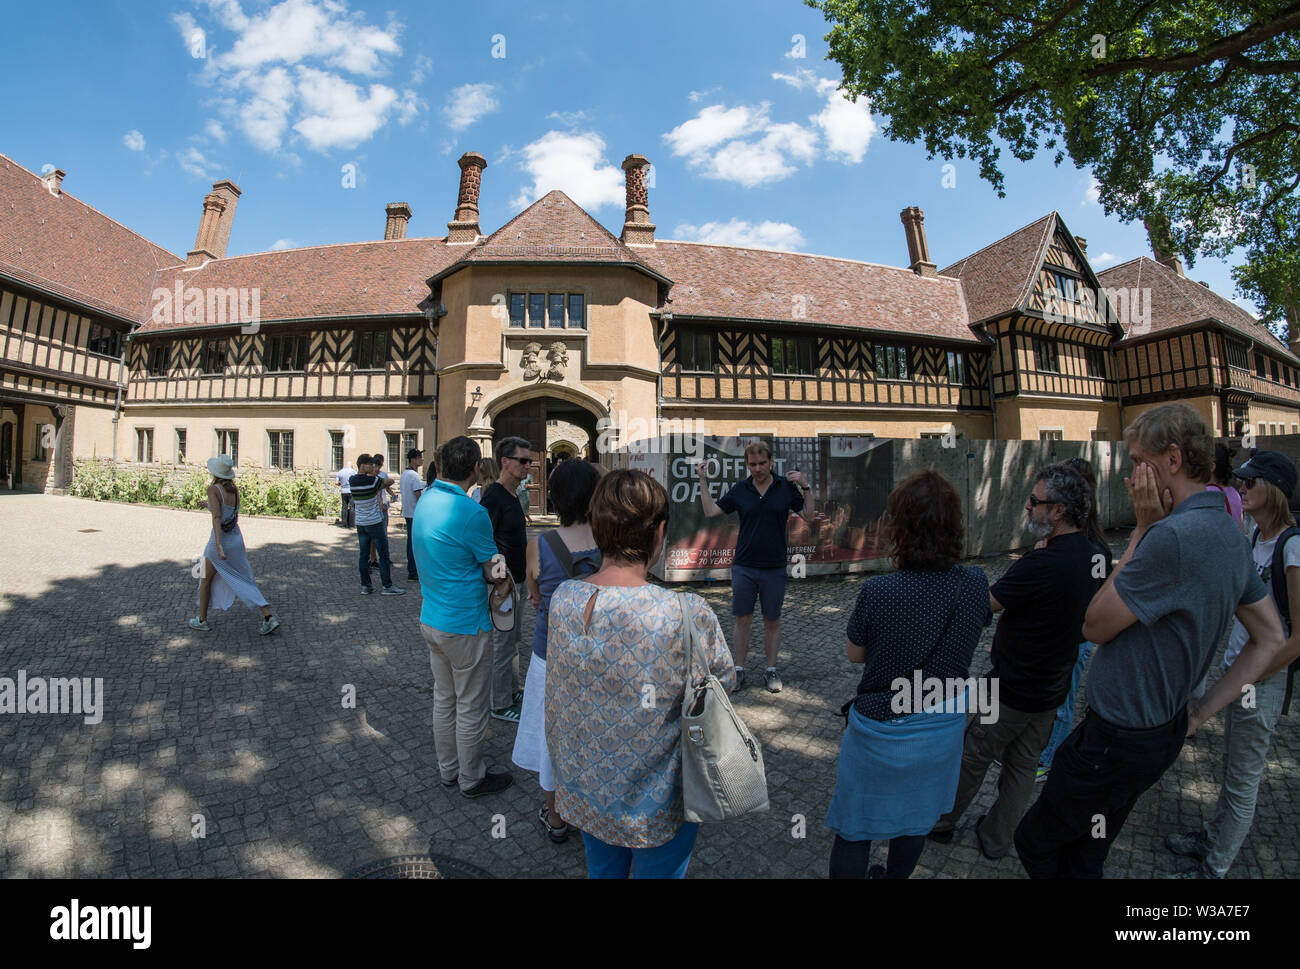 Potsdam, Germany. 15th July, 2018. A group of visitors stands at the entrance to Cecilienhof Castle. Cecilienhof was built between 1913 and 1917 by Emperor Wilhelm II for his son Crown Prince Wilhelm. Here, after the Second World War, the Allies signed the Potsdam Agreement. Credit: Frank Rumpenhorst/dpa/Alamy Live News Stock Photo